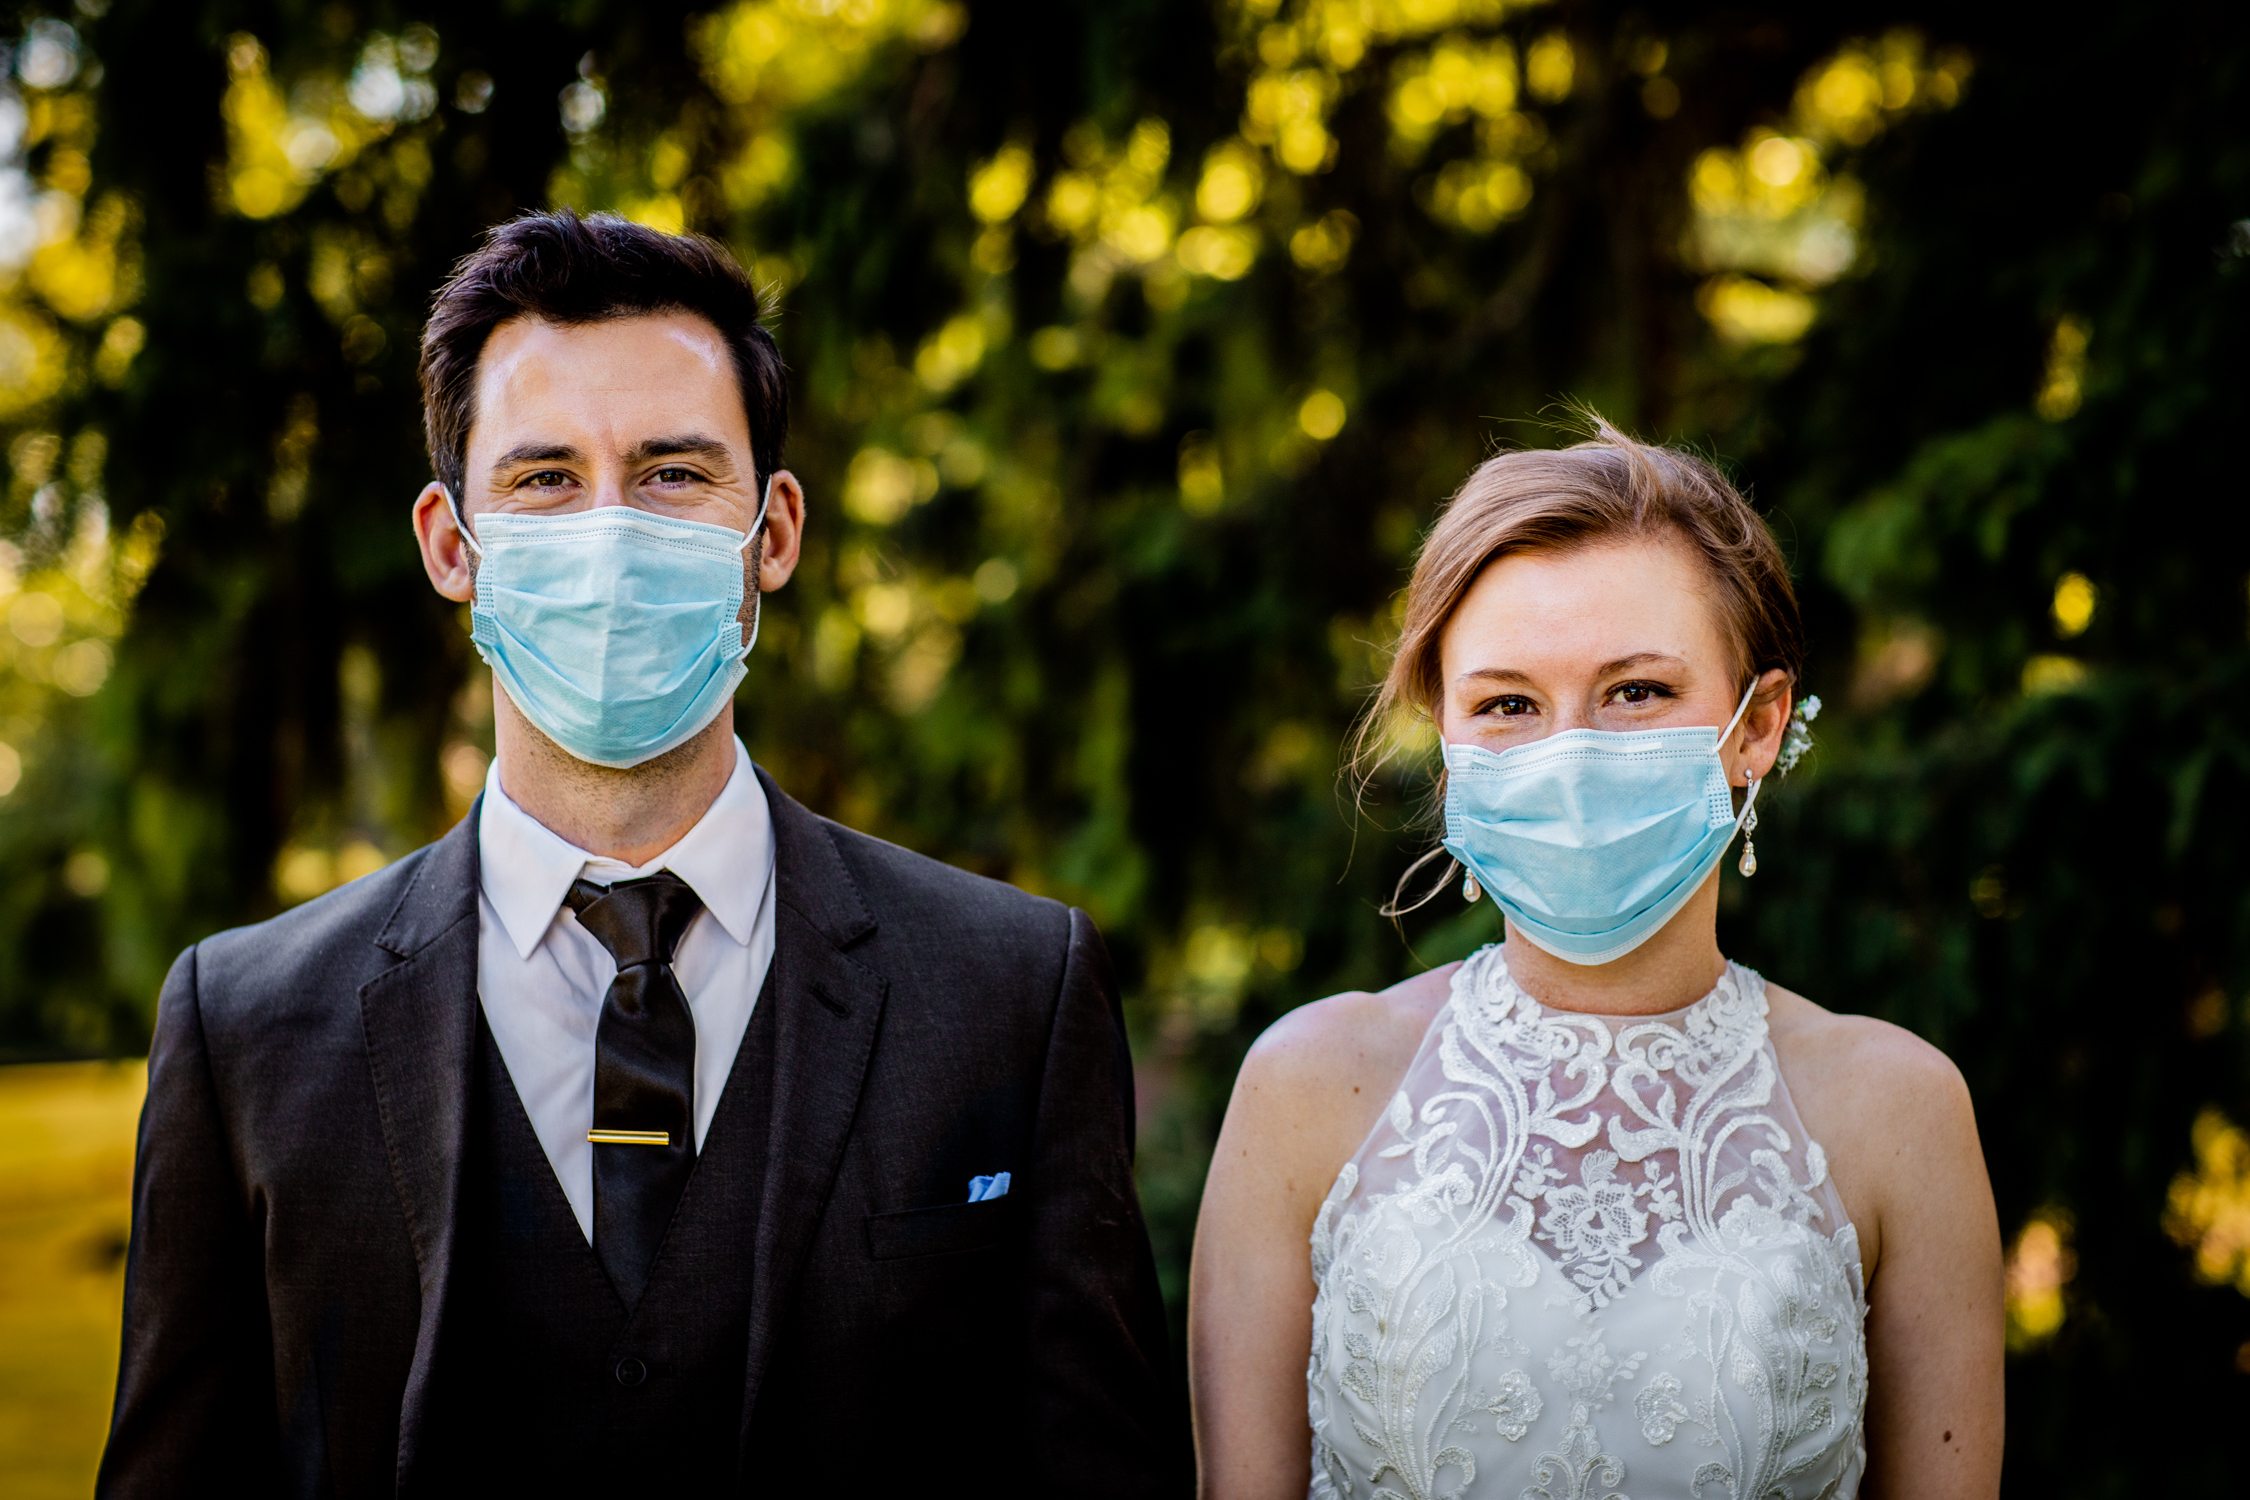 A bride and groom portrait in masks at a Naperville micro wedding at DuPage River Park.